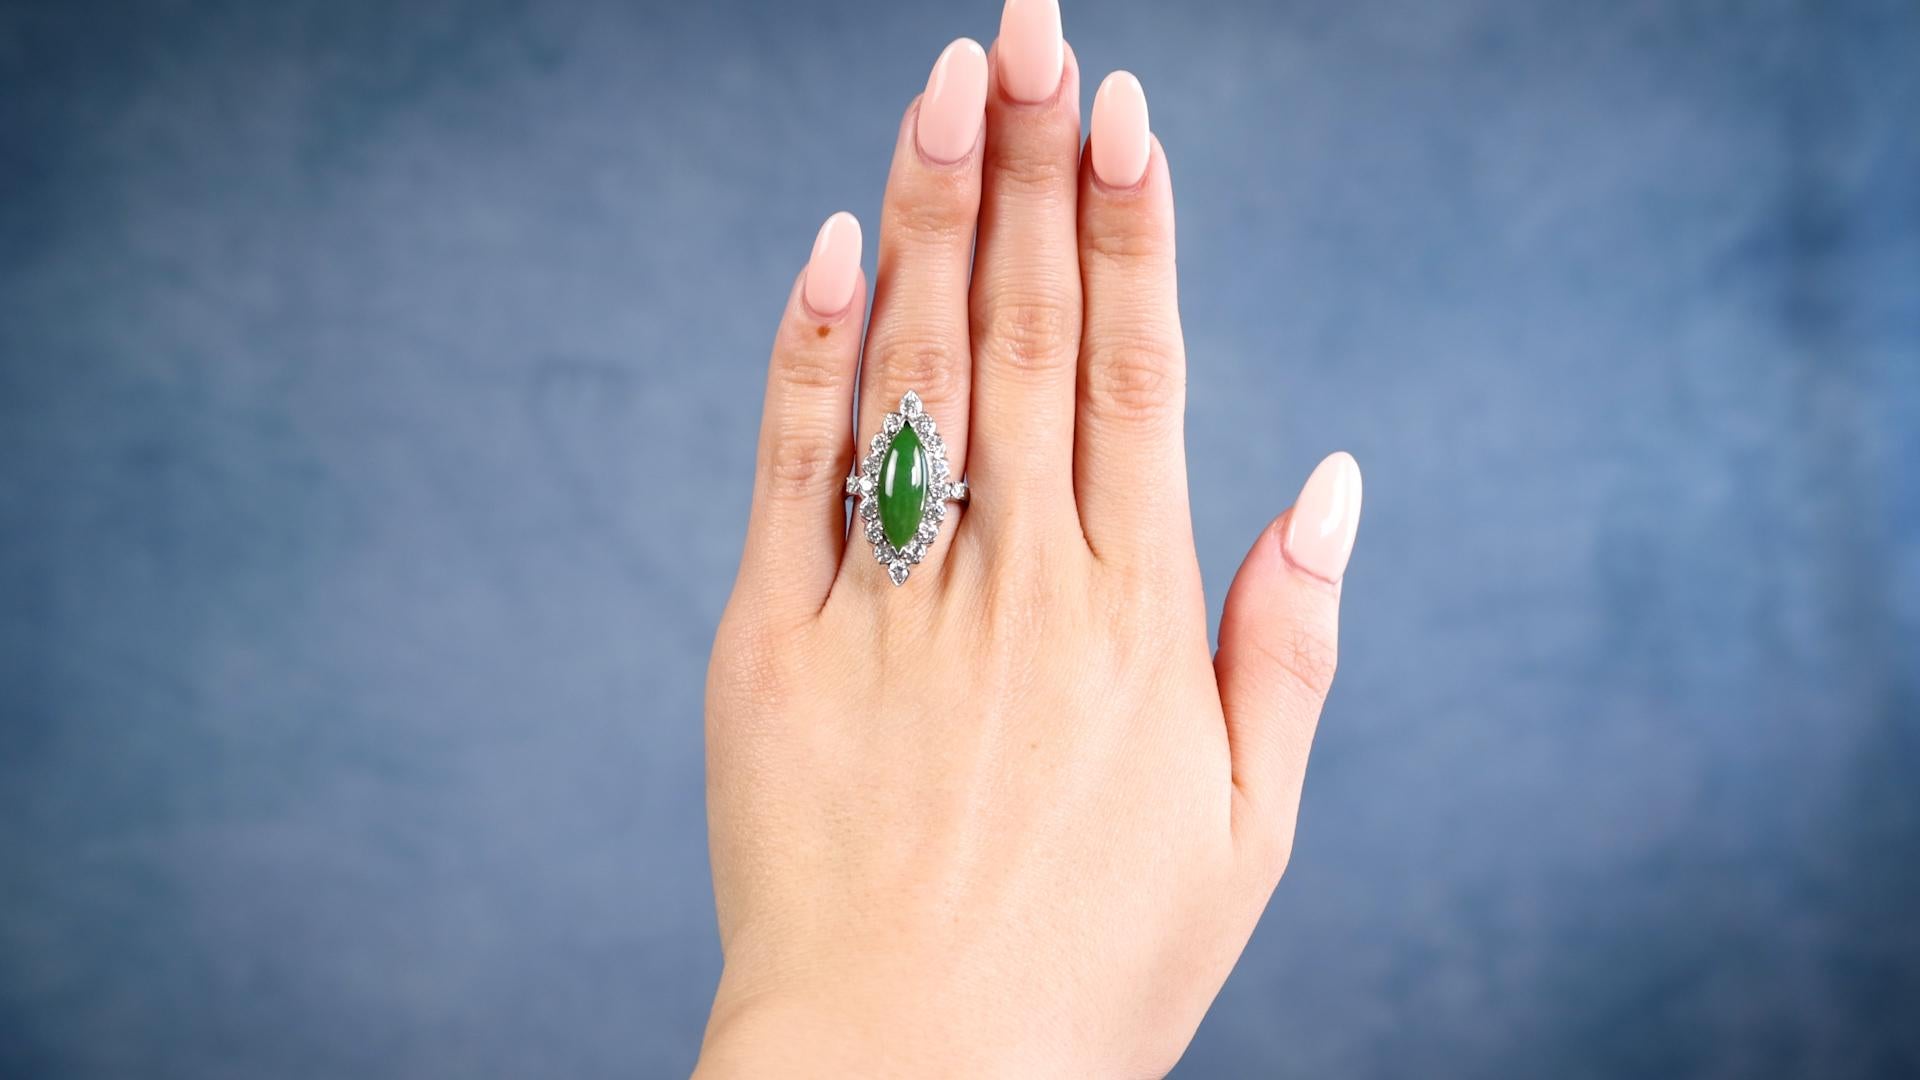 One Mid-Century Jadeite Diamond 14k White Gold Navette Ring. Featuring one cabochon cut marquise jadeite weighing approximately 2.50 carats. Accented by 18 round brilliant and old European cut diamonds with a total weight of approximately 1.20